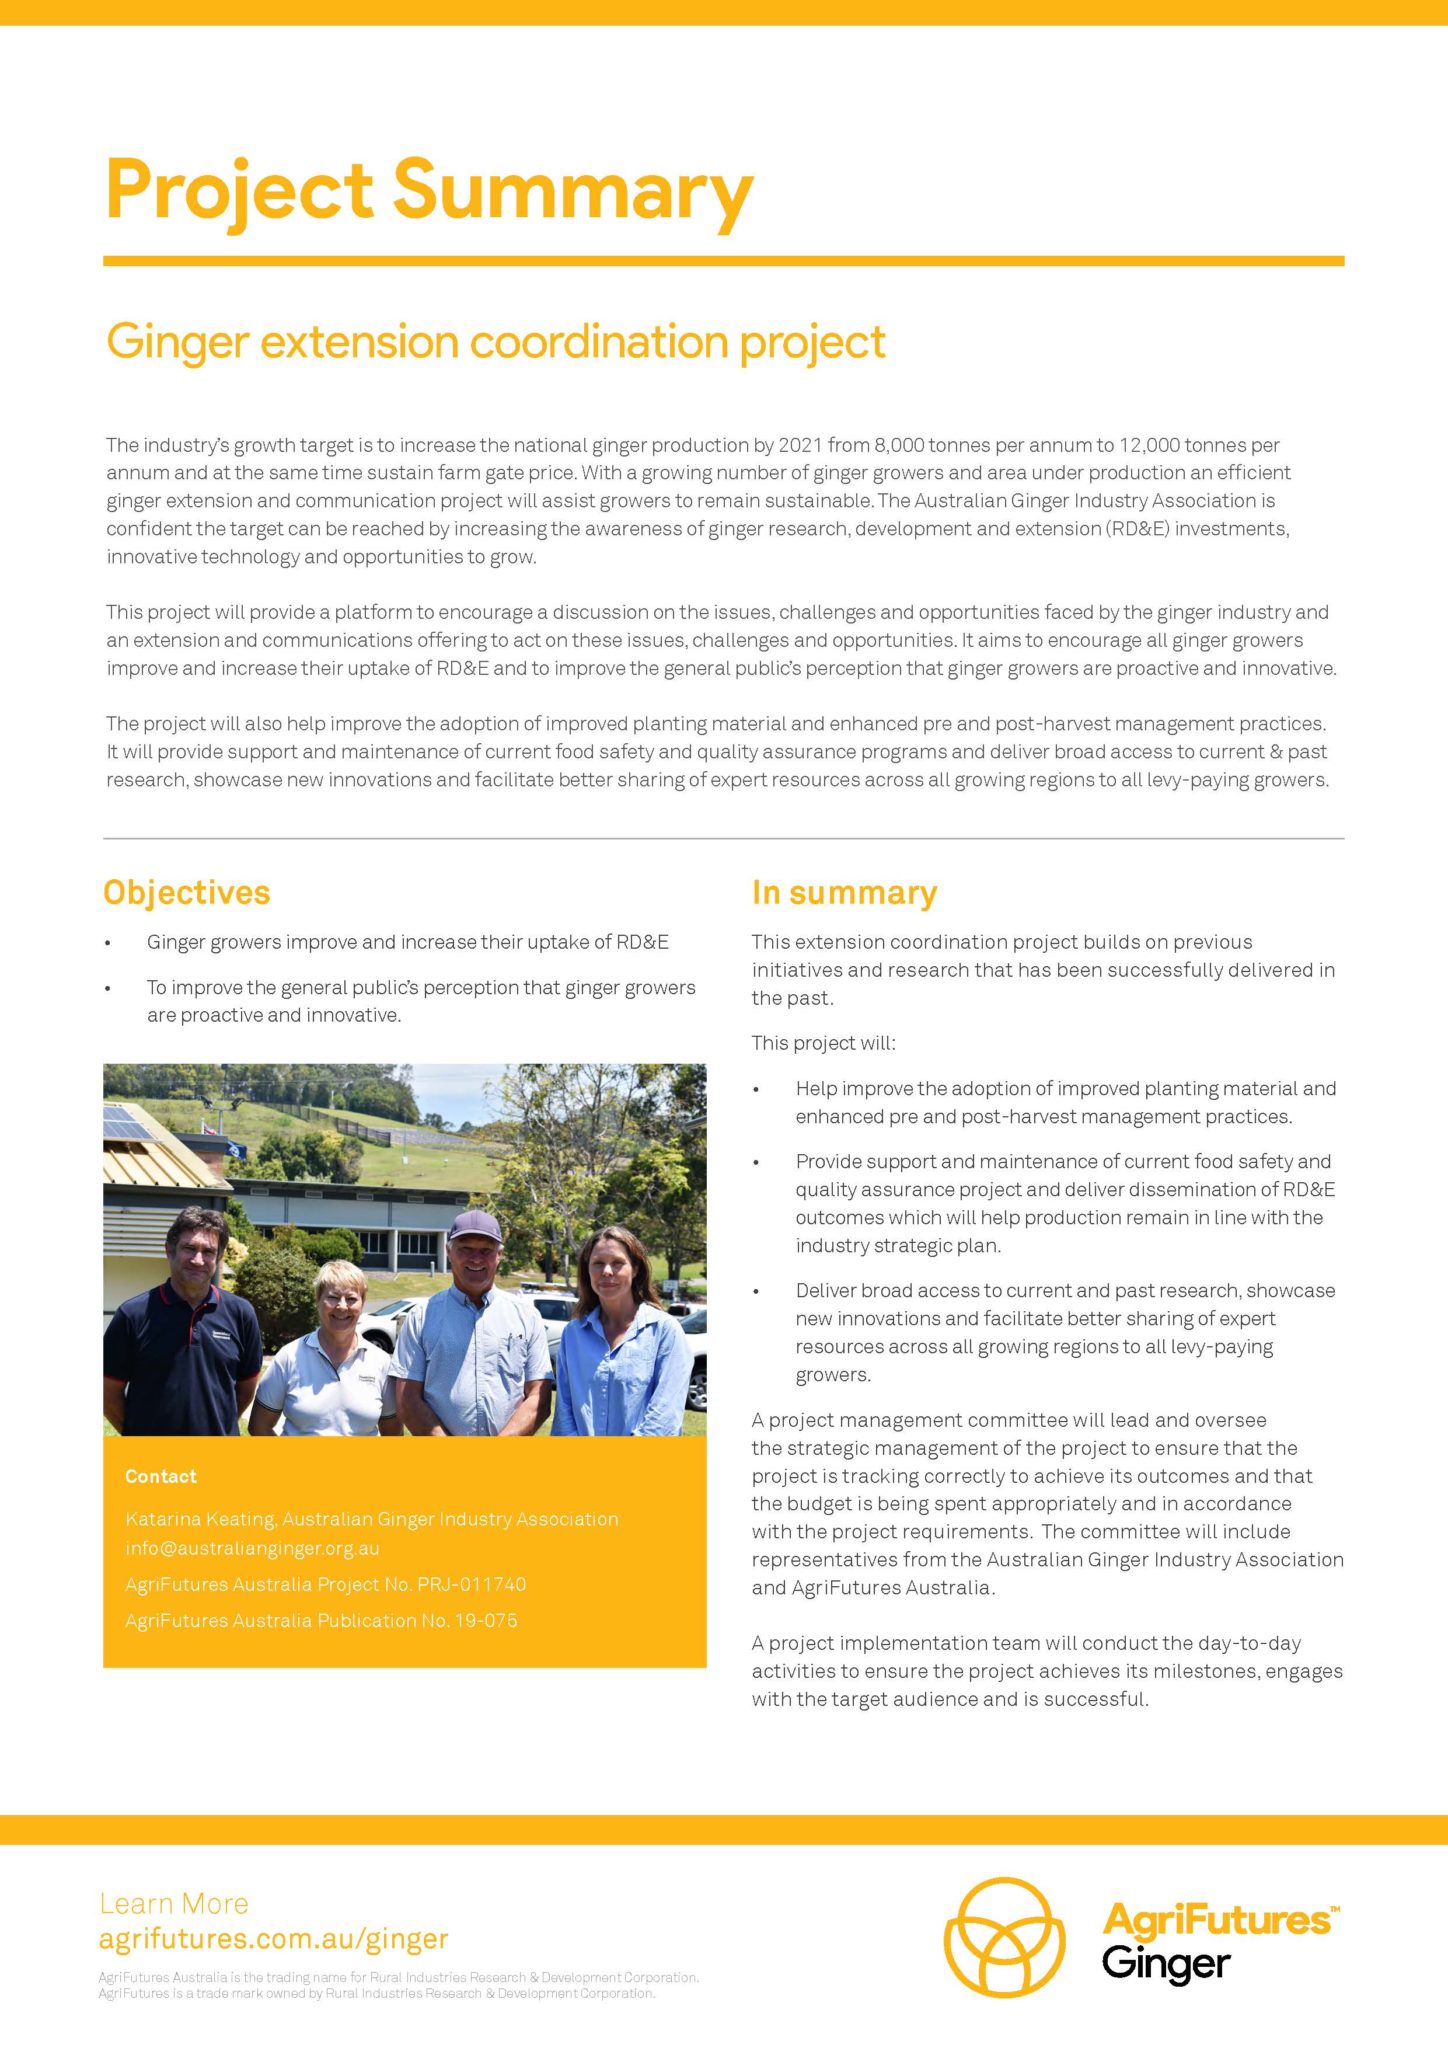 Project summary: Ginger extension coordination project - image